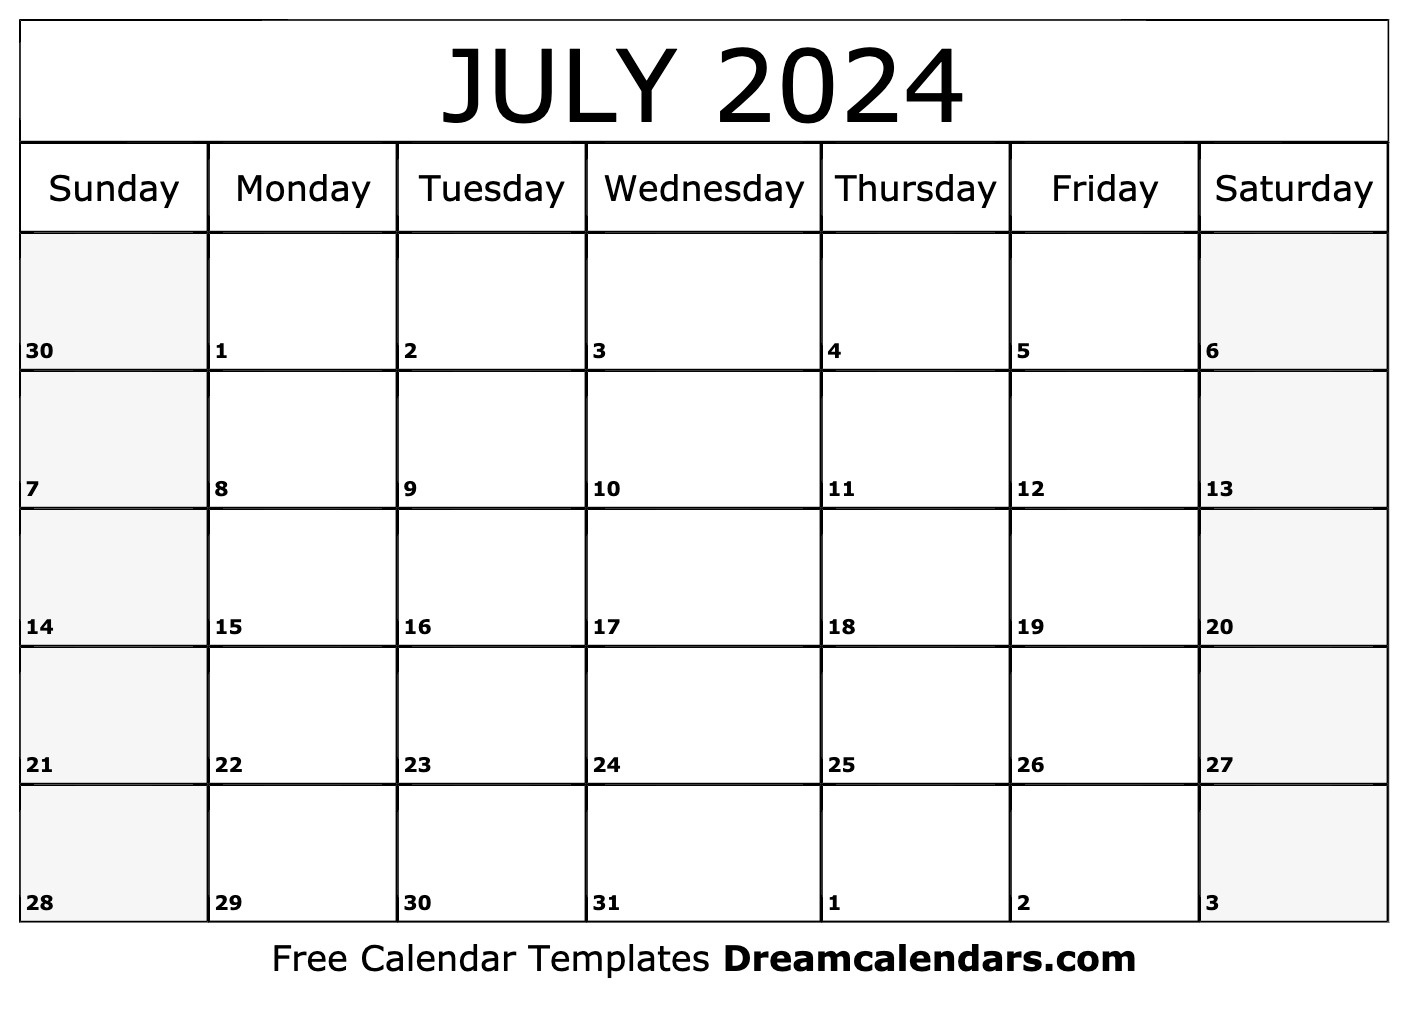 July 2024 Calendar - Free Printable With Holidays And Observances inside July 13 2024 Calendar